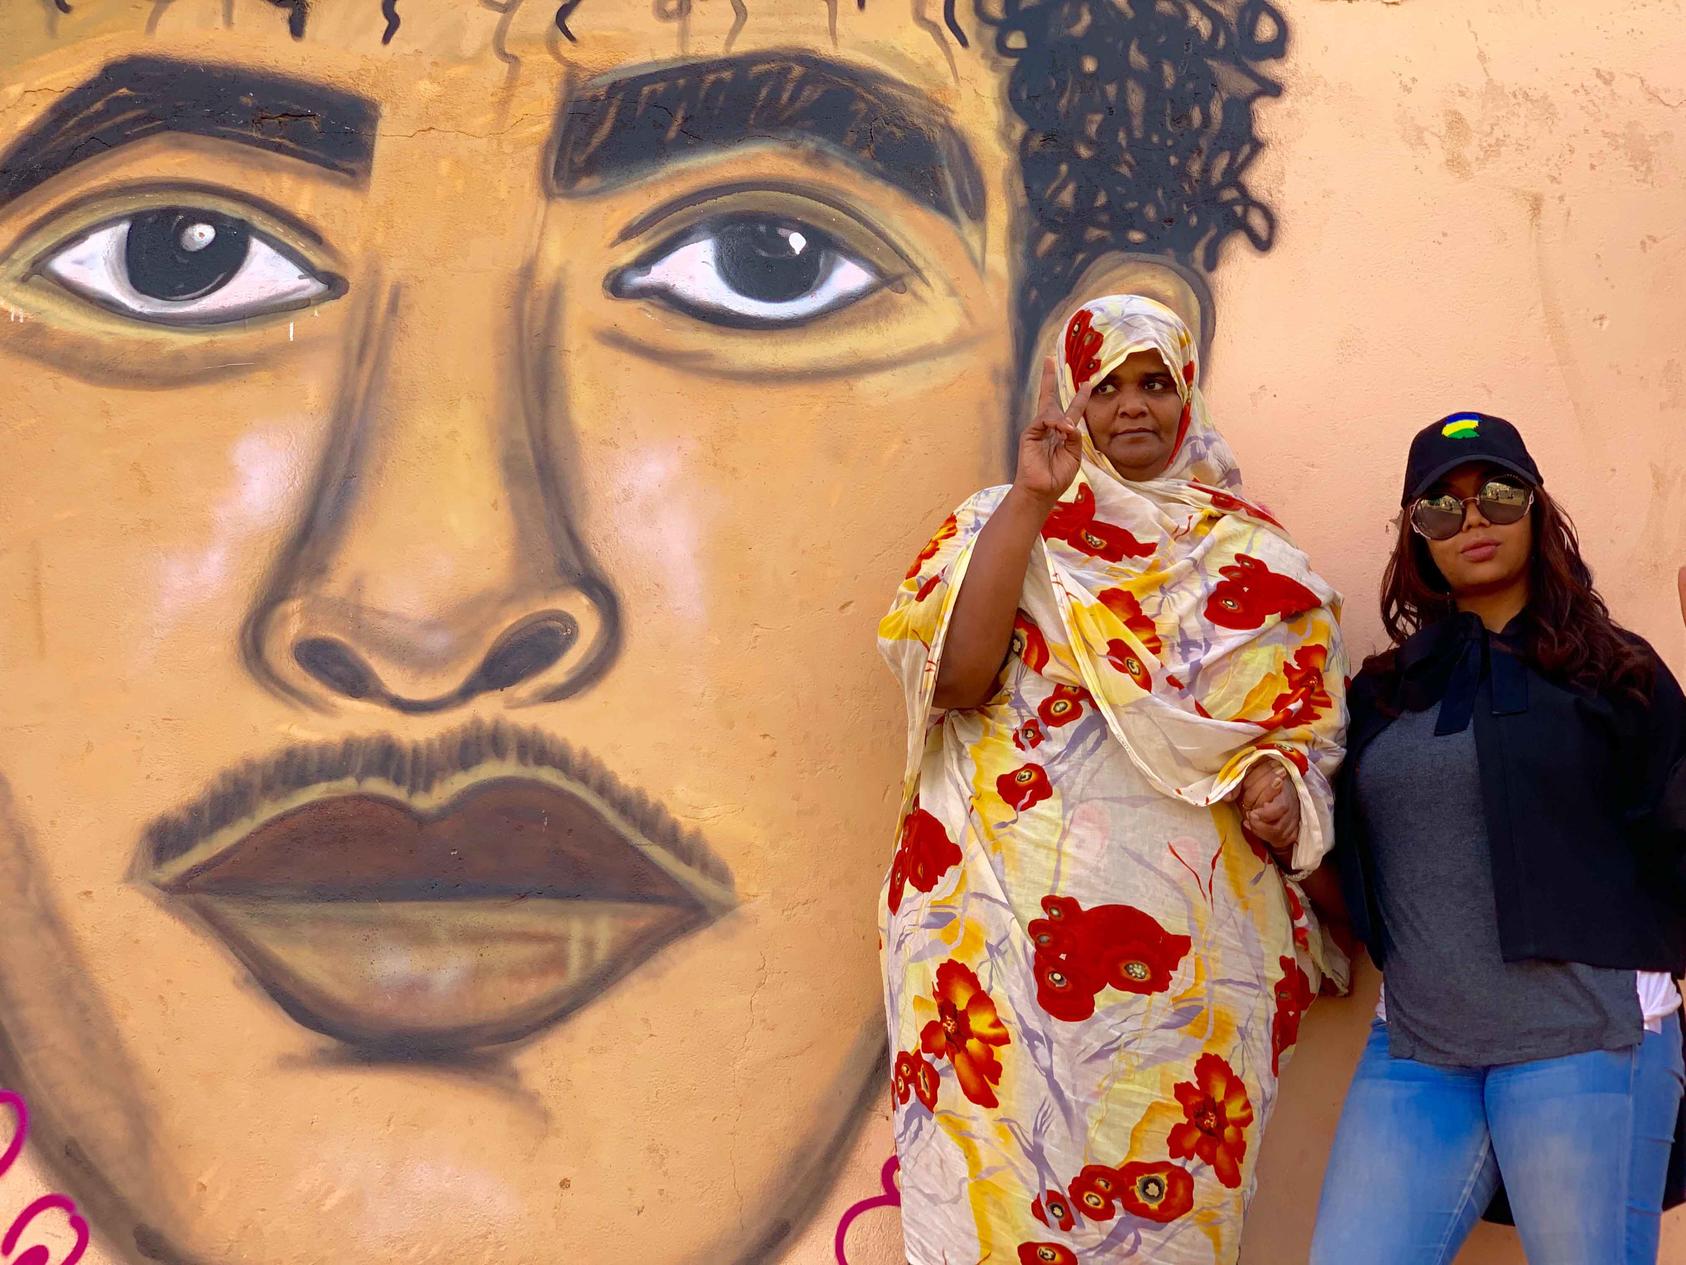 Assil Diab poses with Ahlam Khidr, protest leader and activist, in front of Assil’s mural of Ahlam’s son Hazaa Izzeldine Jaafar, who was killed while peacefully protesting Bashir’s regime in September 2013. 